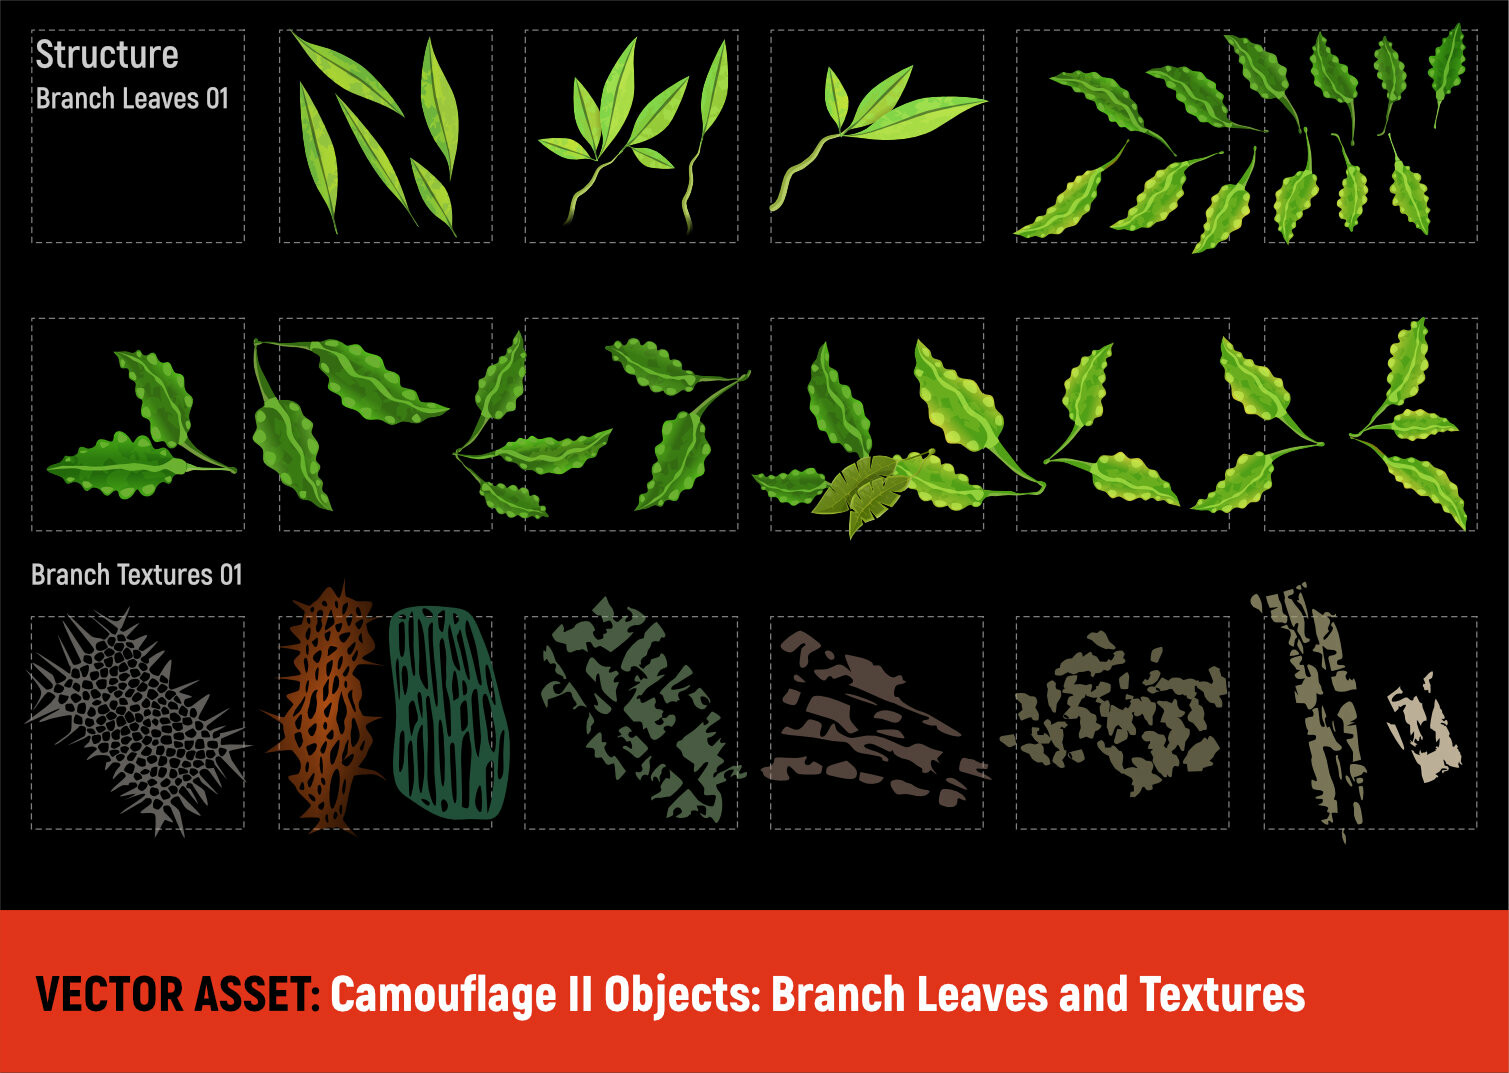 Vector Assets: Camouflage 2
Leaves and Textures